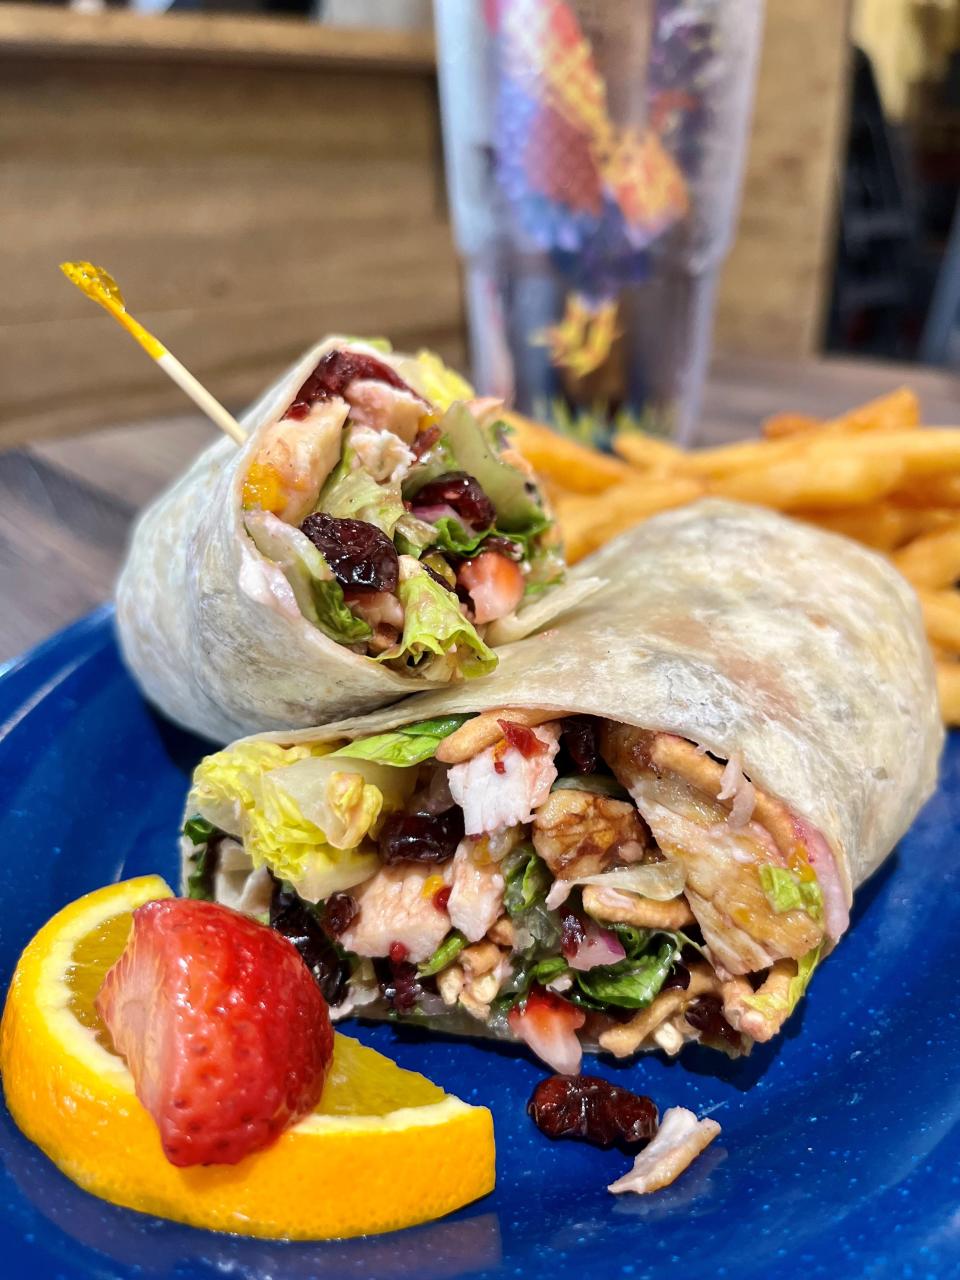 Wraps are on the lunch menu at Over Easy Cafe on Sanibel.